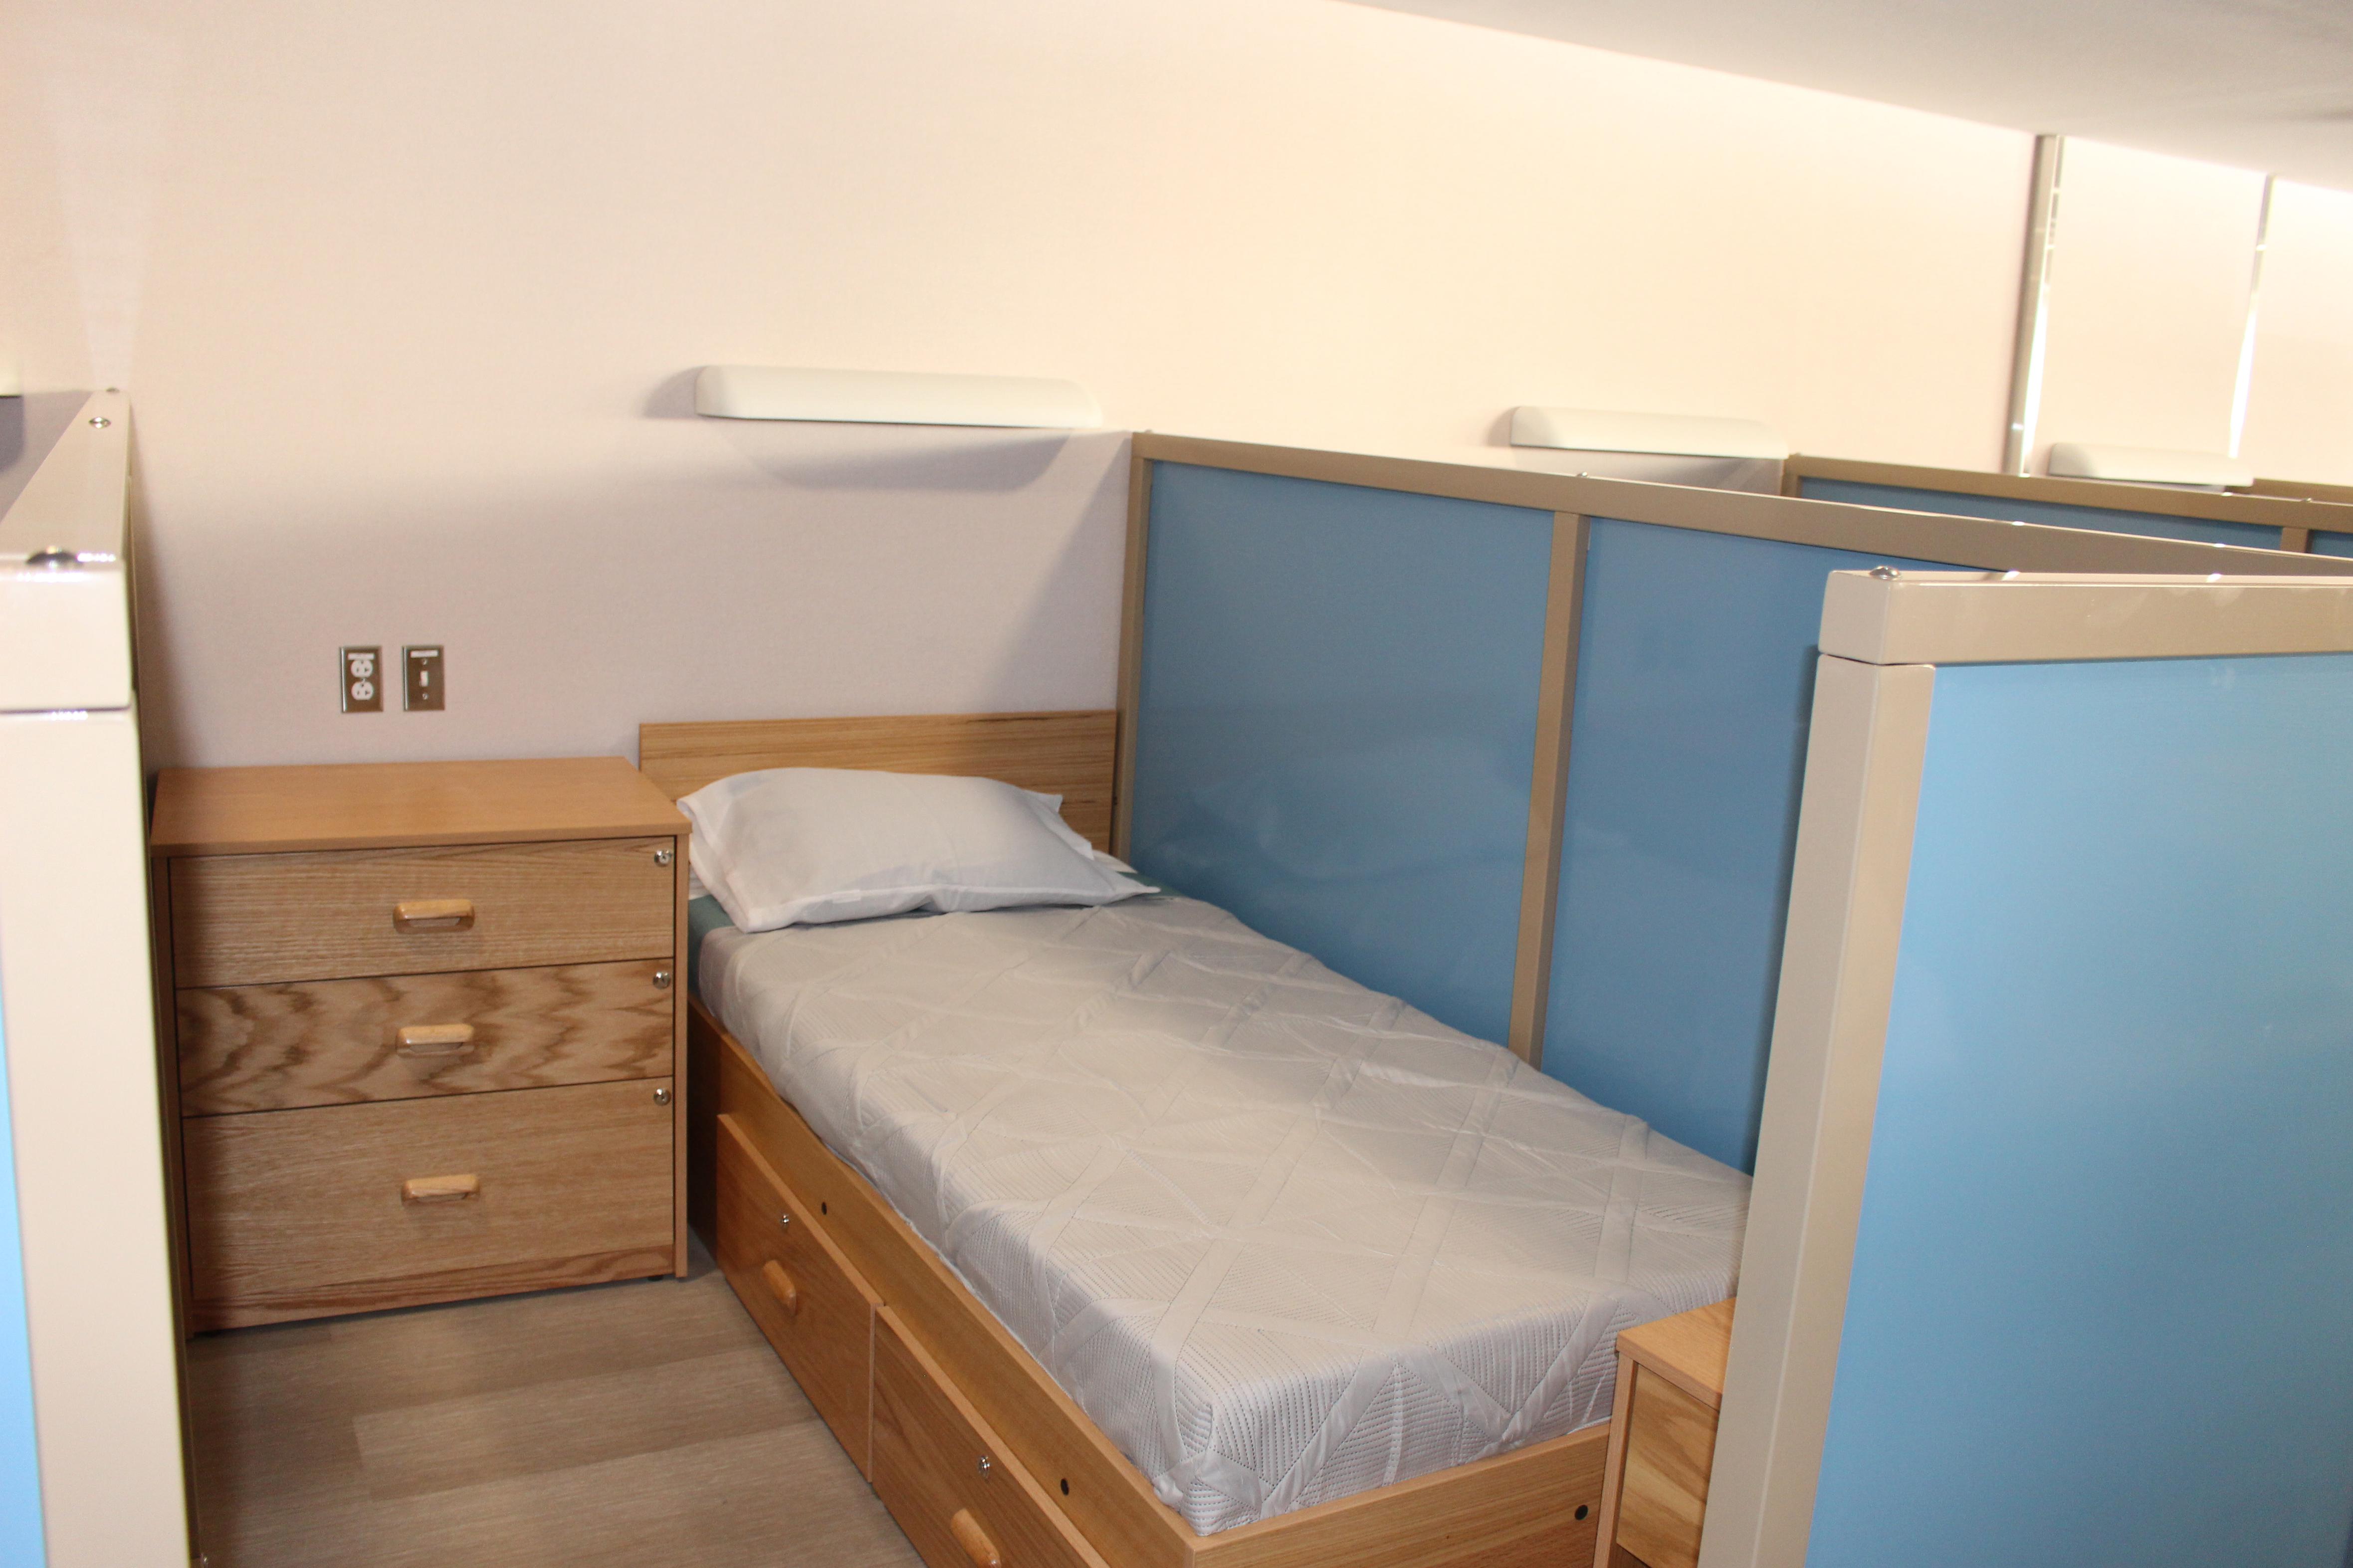 A bed in a cubicle with a blue privacy wall separating it from the next bed